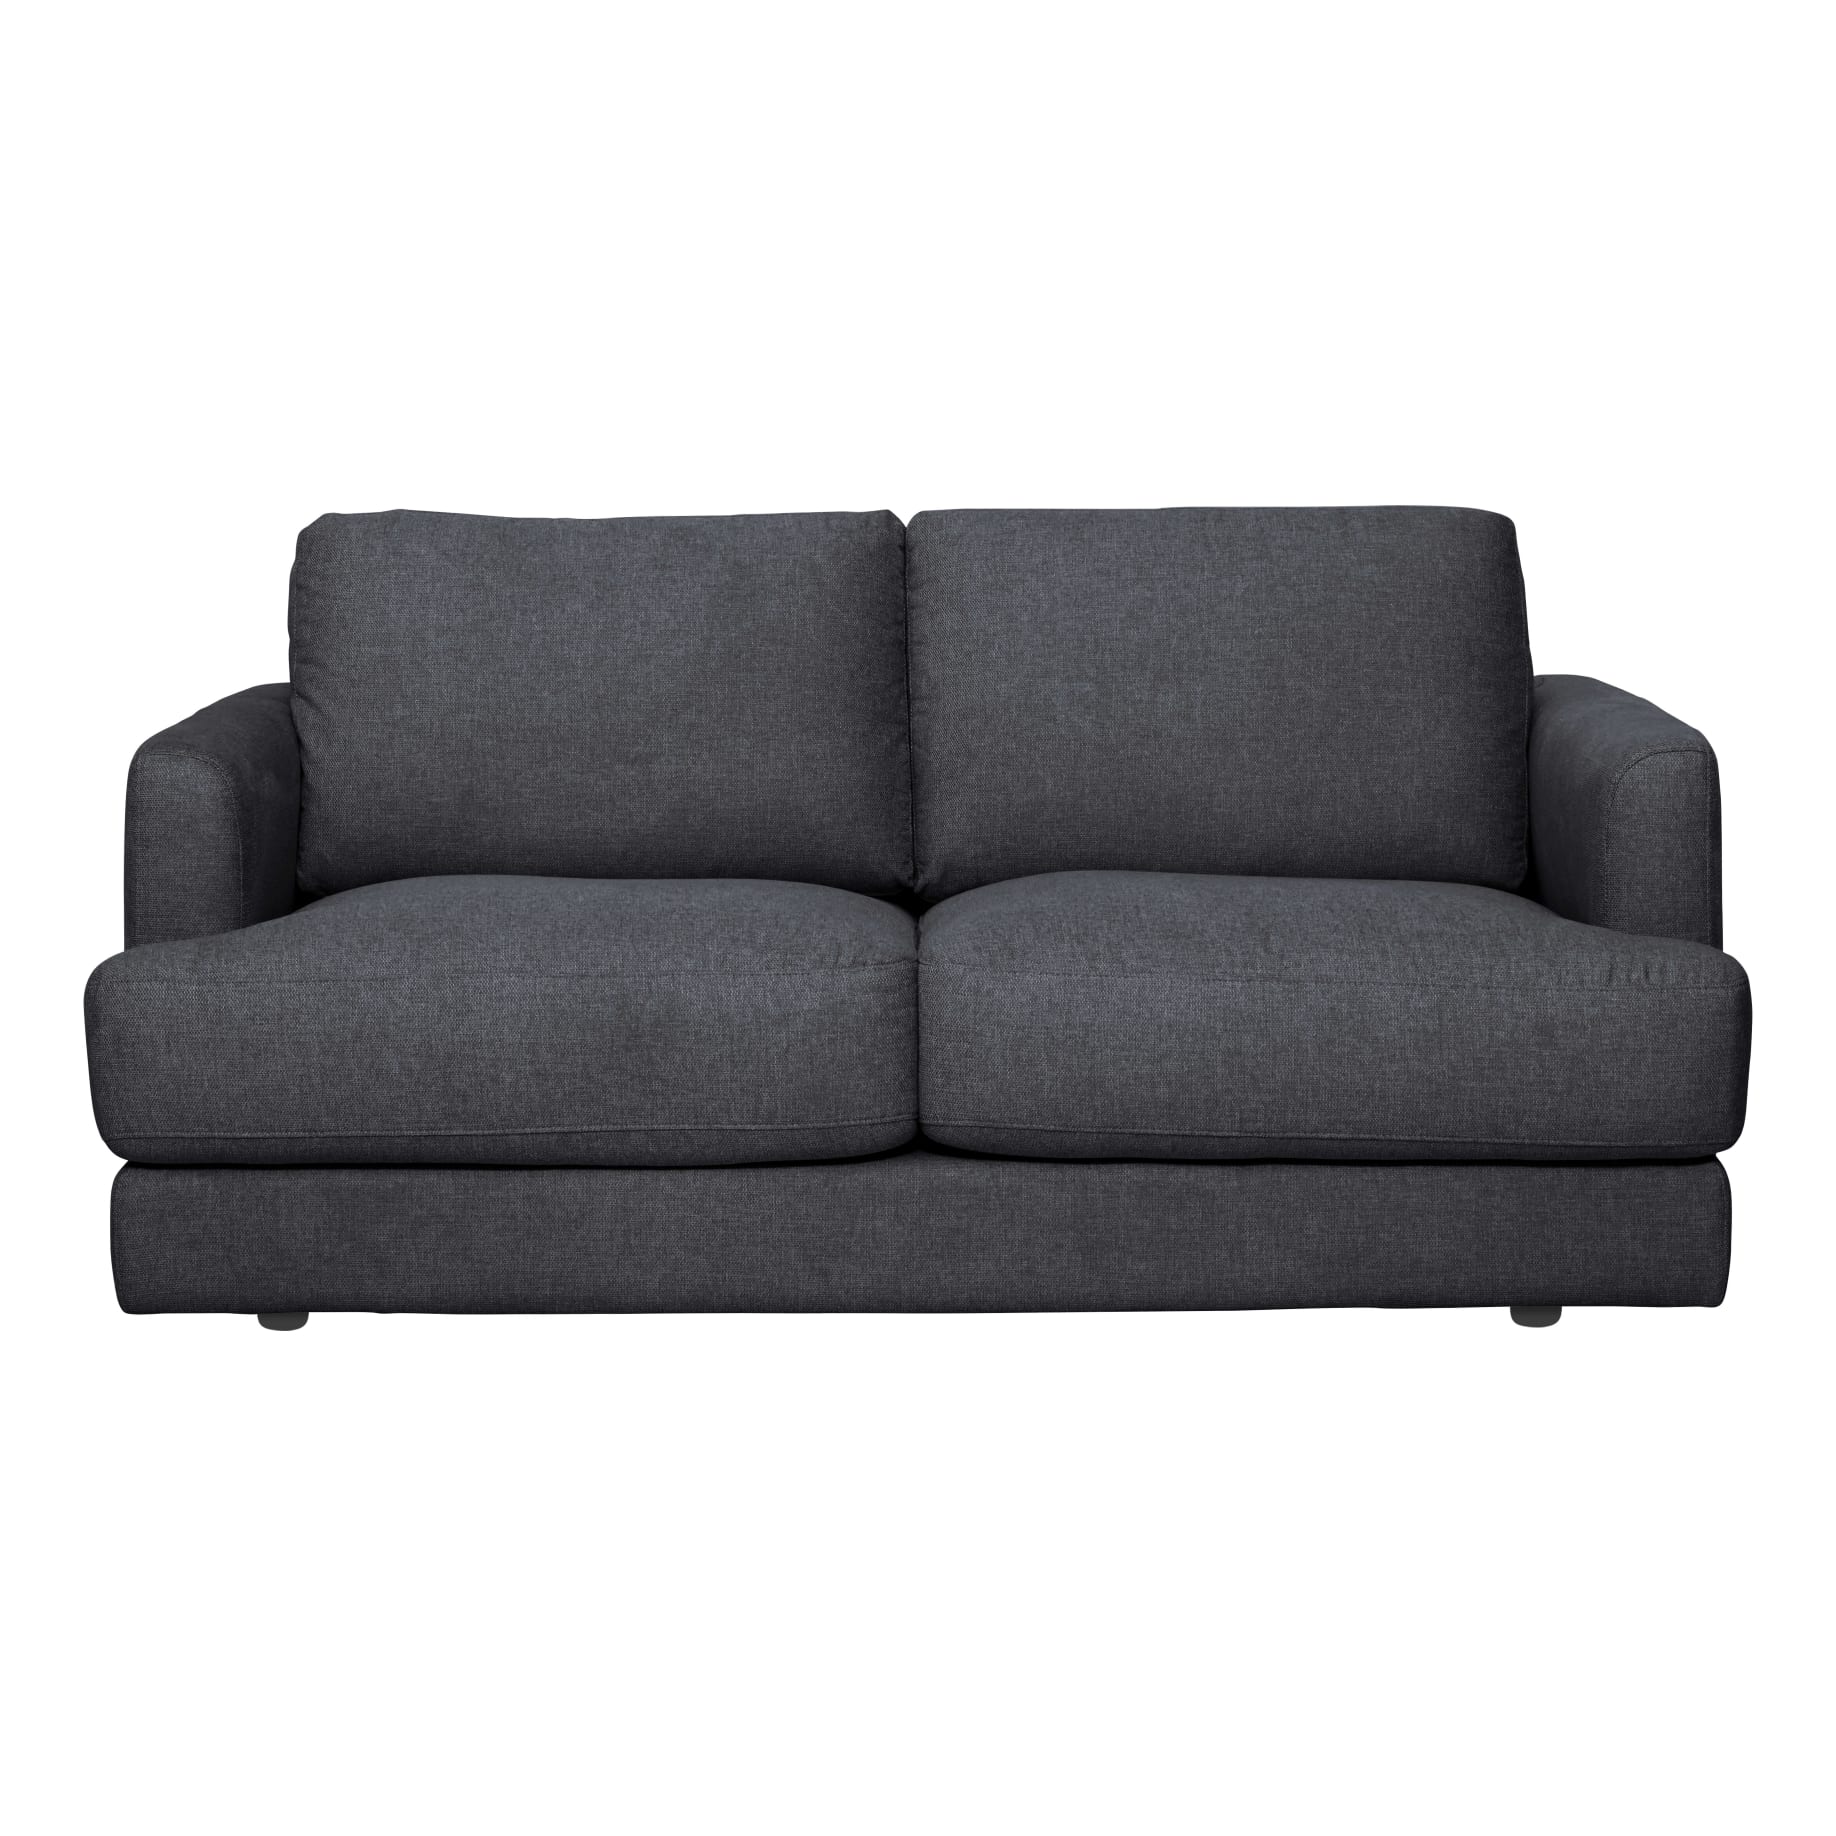 Temple 2 Seater Sofa in Belfast Charcoal